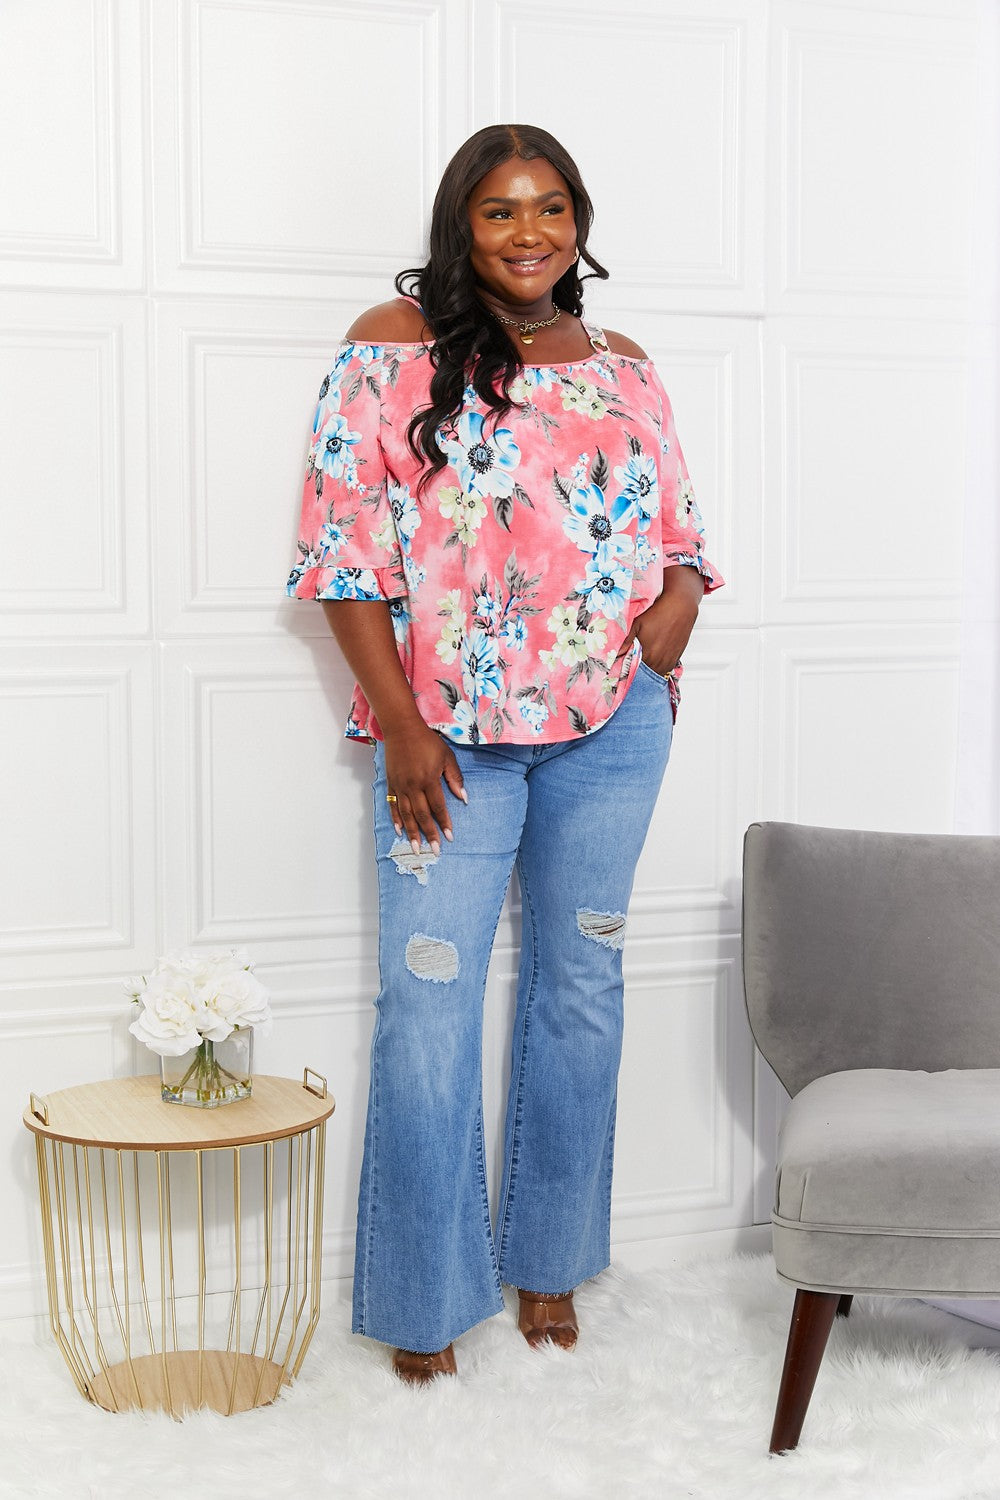 Sew In Love Full Size Fresh Take Floral Cold-Shoulder Top free shipping -Oh Em Gee Boutique